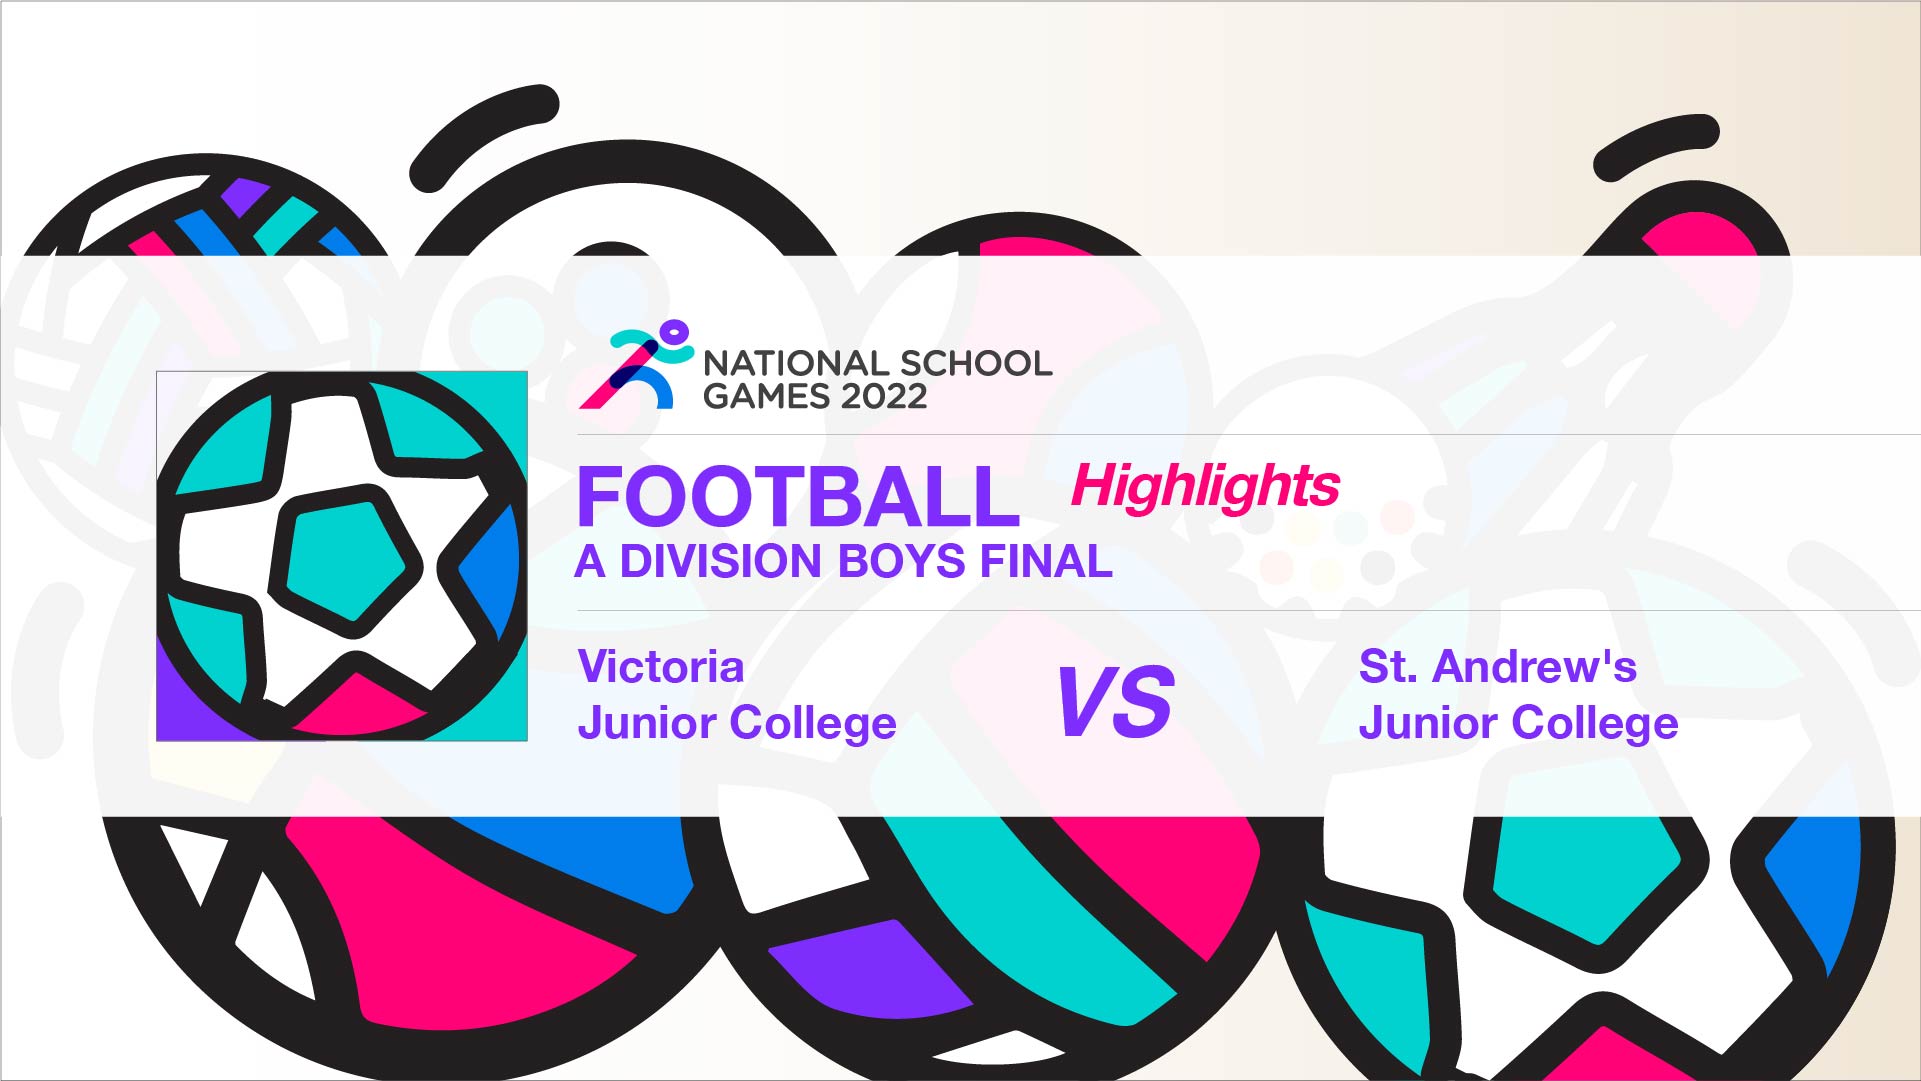 SSSC Football A Division Boys Final | Victoria Junior College vs St. Andrew's Junior College - Highlights